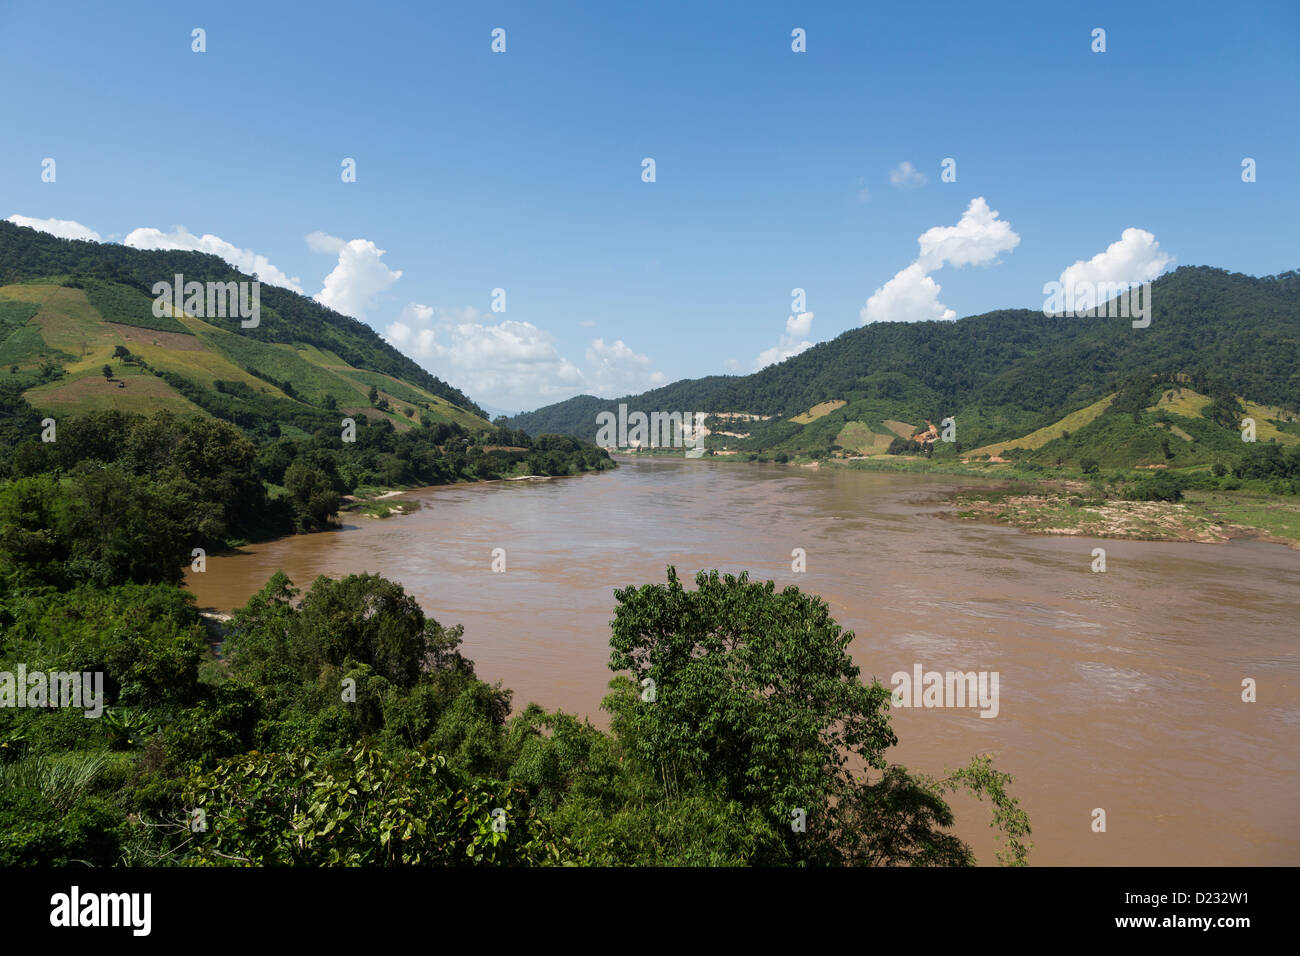 Mekong river marking the border between Thailand and Loas (the other side) in North Thailand, Chiang Rai province Stock Photo